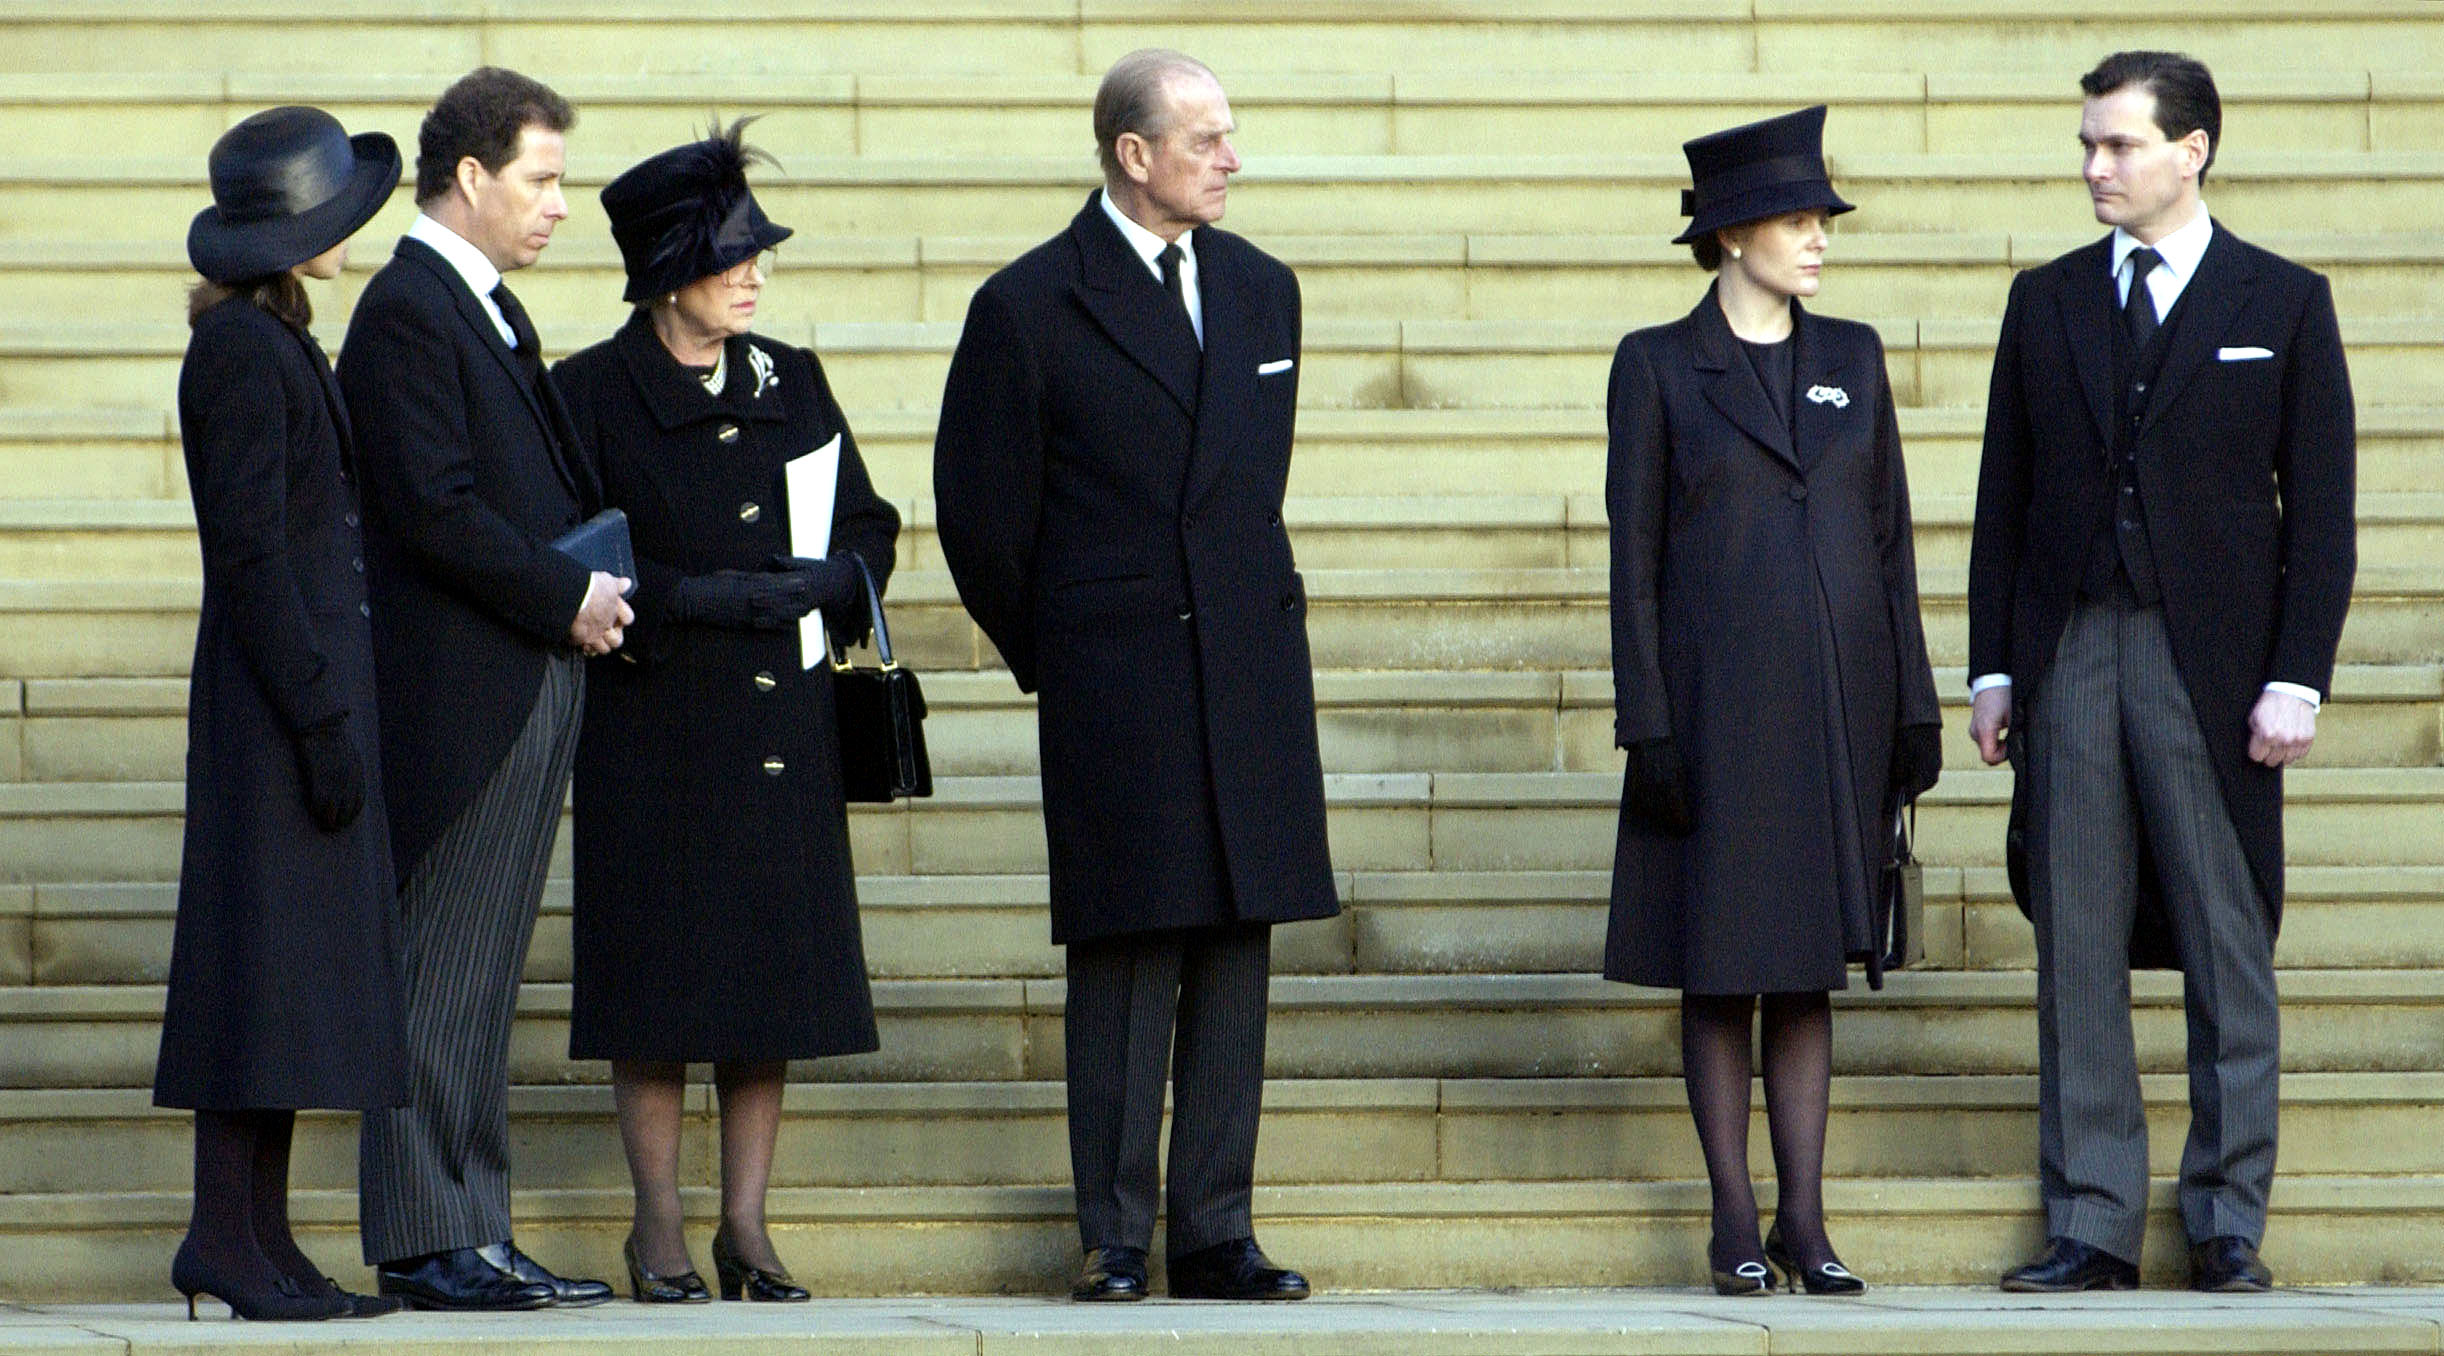 <p>Princess Margaret's children -- Lady Sarah Chatto and David Armstrong-Jones, then known as Lord Linley -- were joined by their aunt, Queen Elizabeth II, as well as Prince Philip, Lady Serena Linley and Daniel Chatto as they watched Margaret's coffin leave St. George's Chapel at Windsor Castle following her funeral service on Feb. 15, 2002. </p>